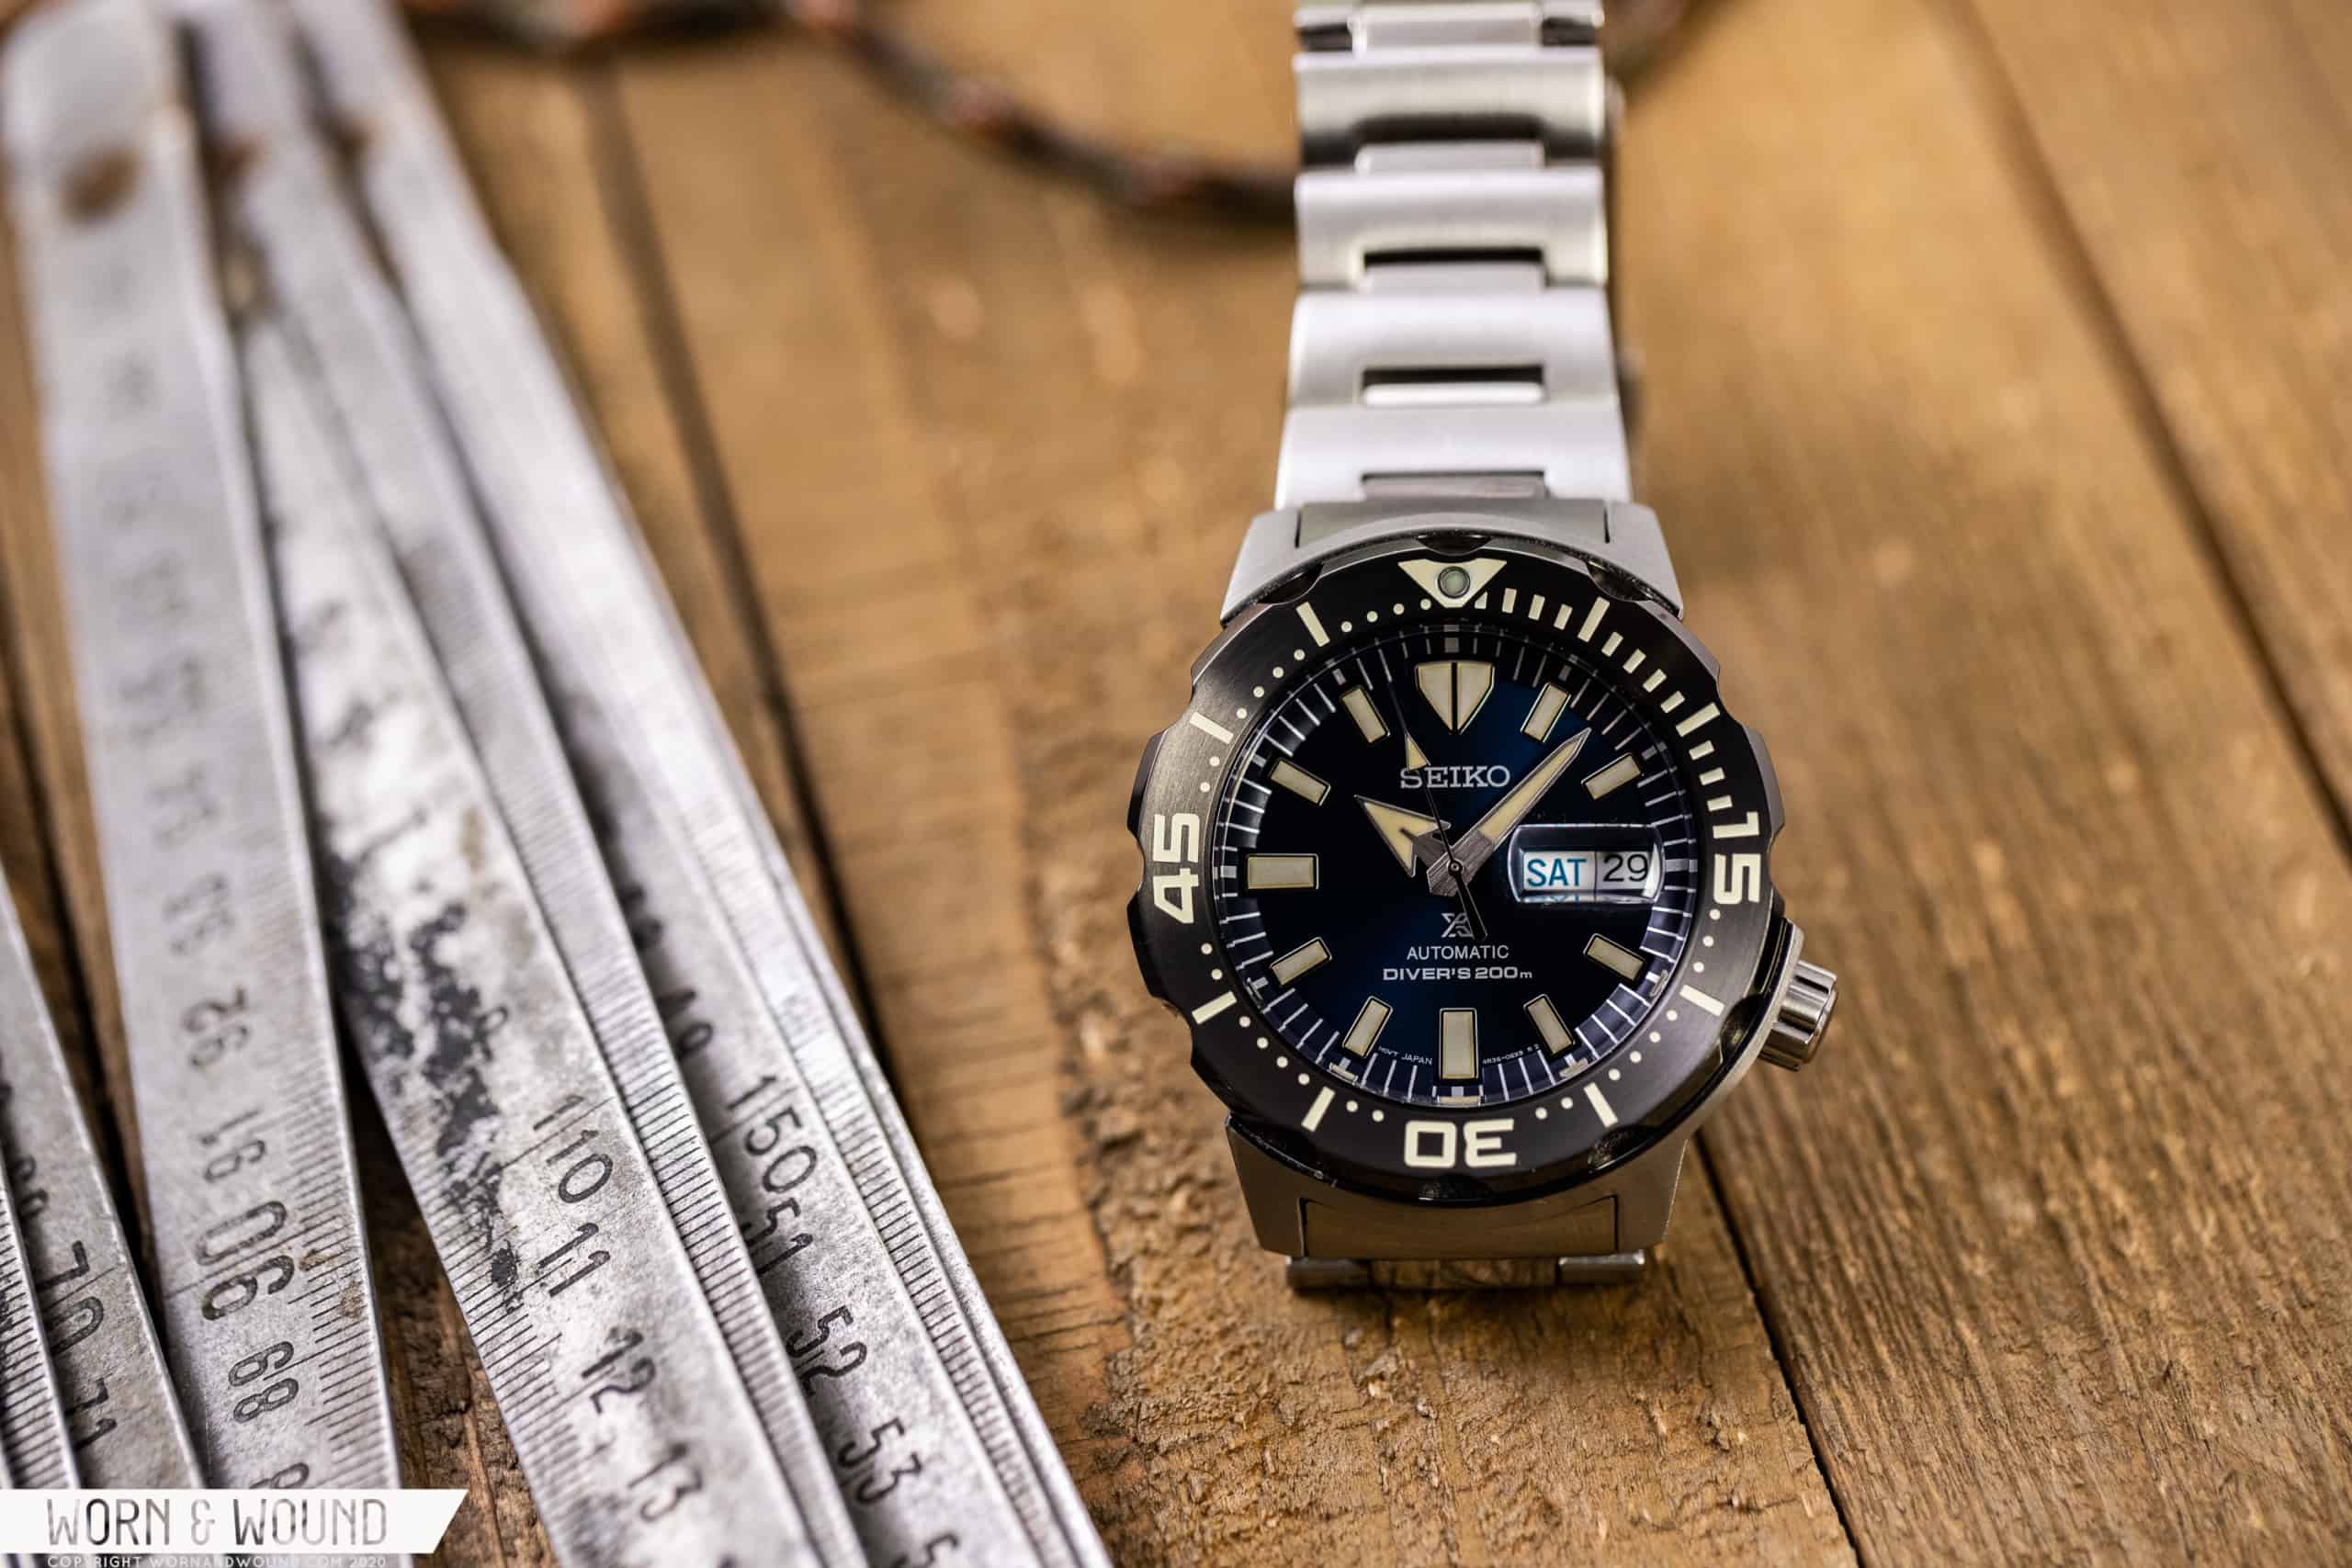 kubiske Arctic brysomme Review: Seiko "Monster" SRPD25 - Worn & Wound